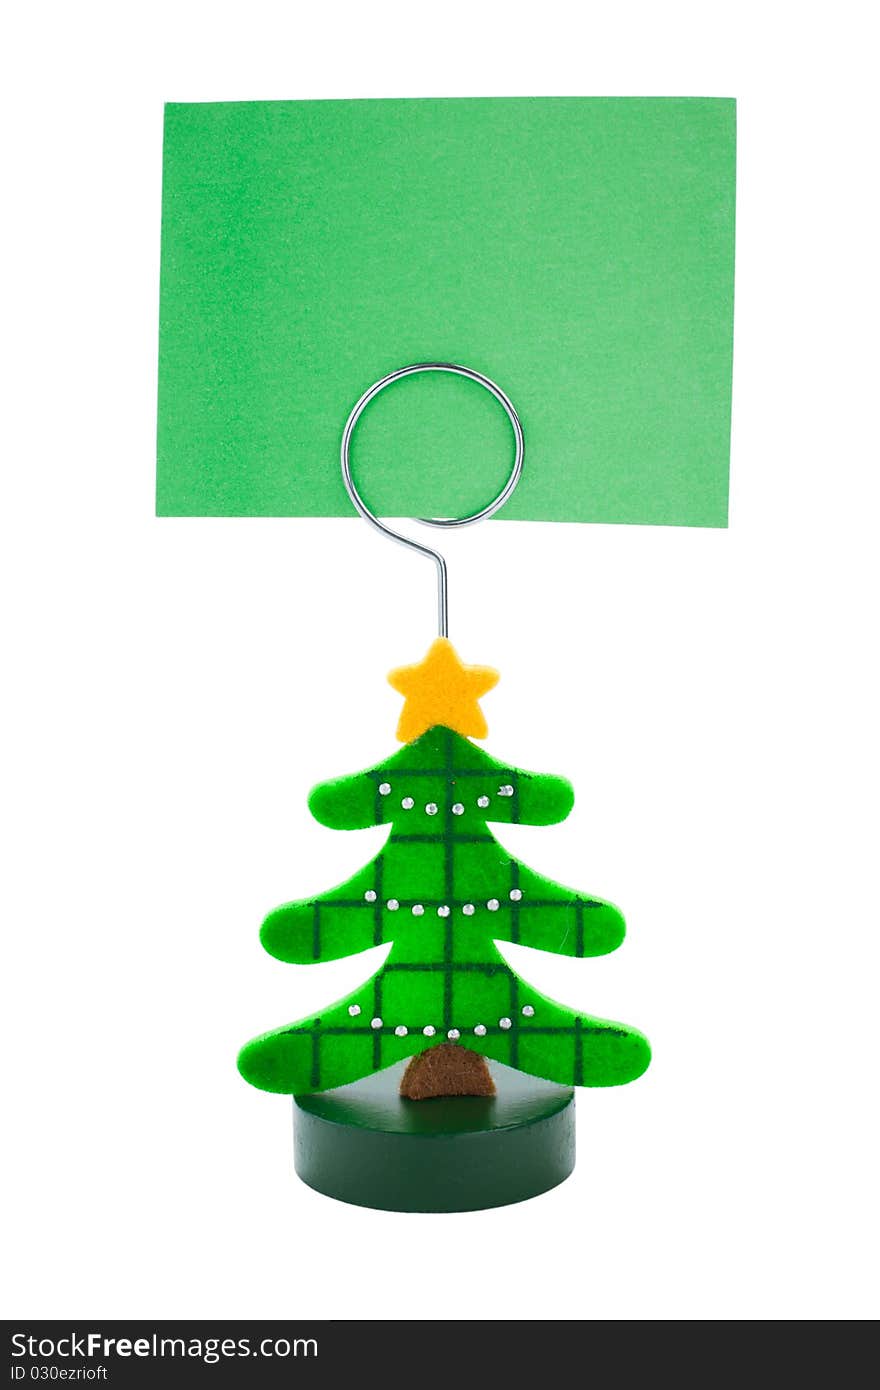 Green note paper in Christmas tree sticker holder on a white background